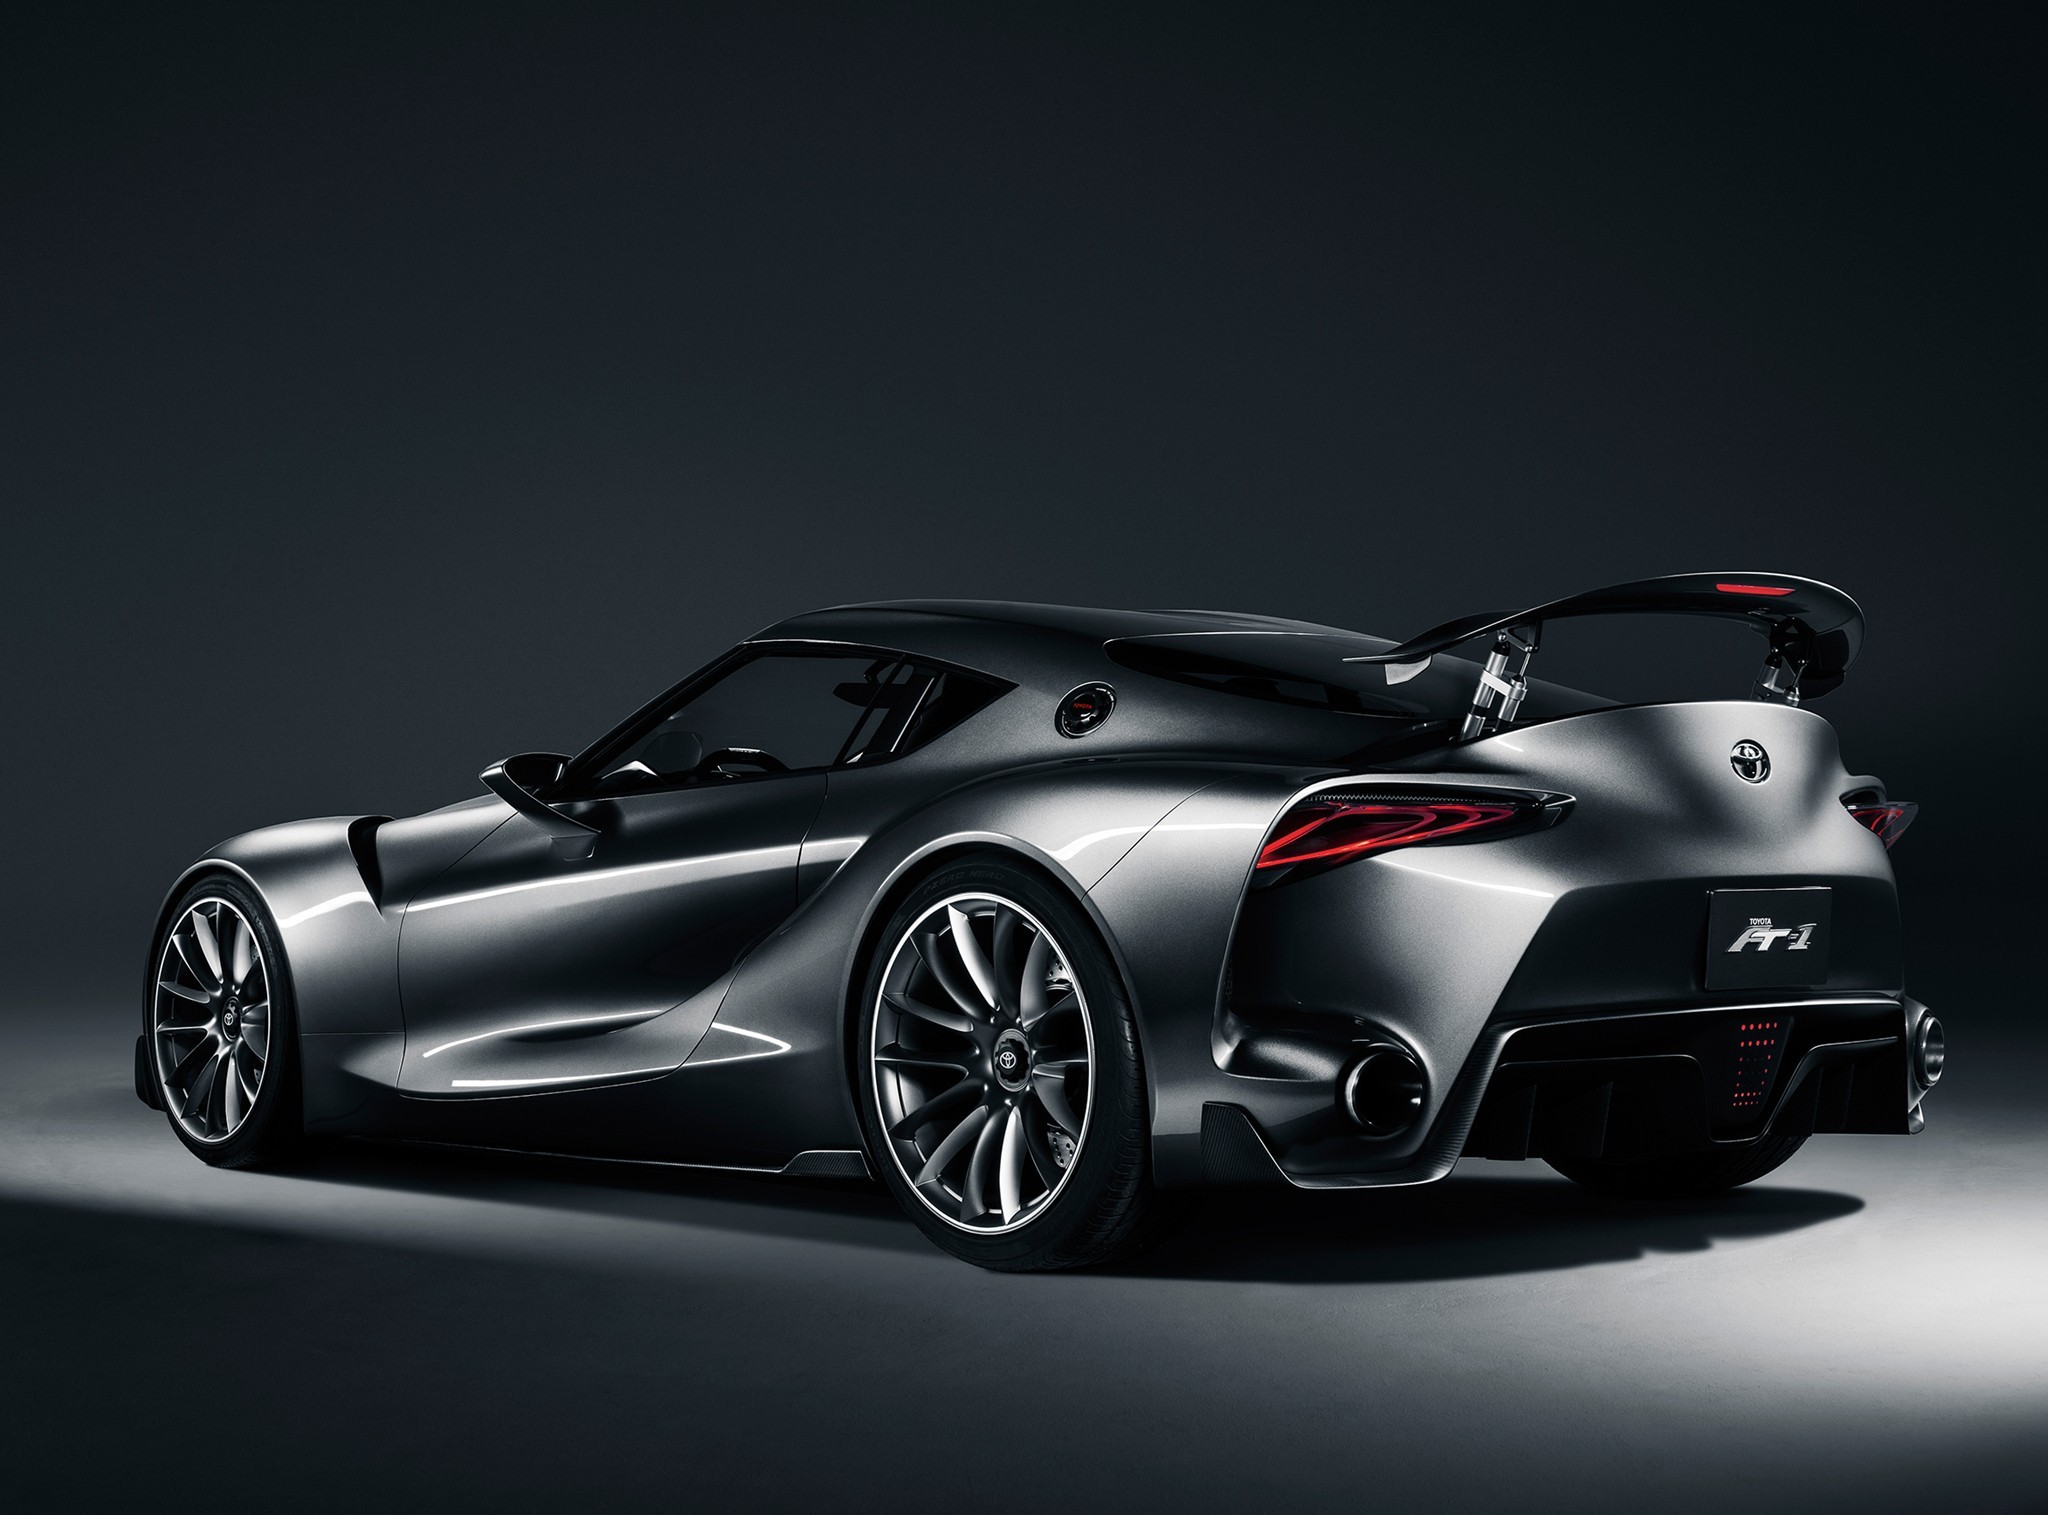 Toyota FT 1 Concept, Car, Vehicle, Silver cars Wallpaper